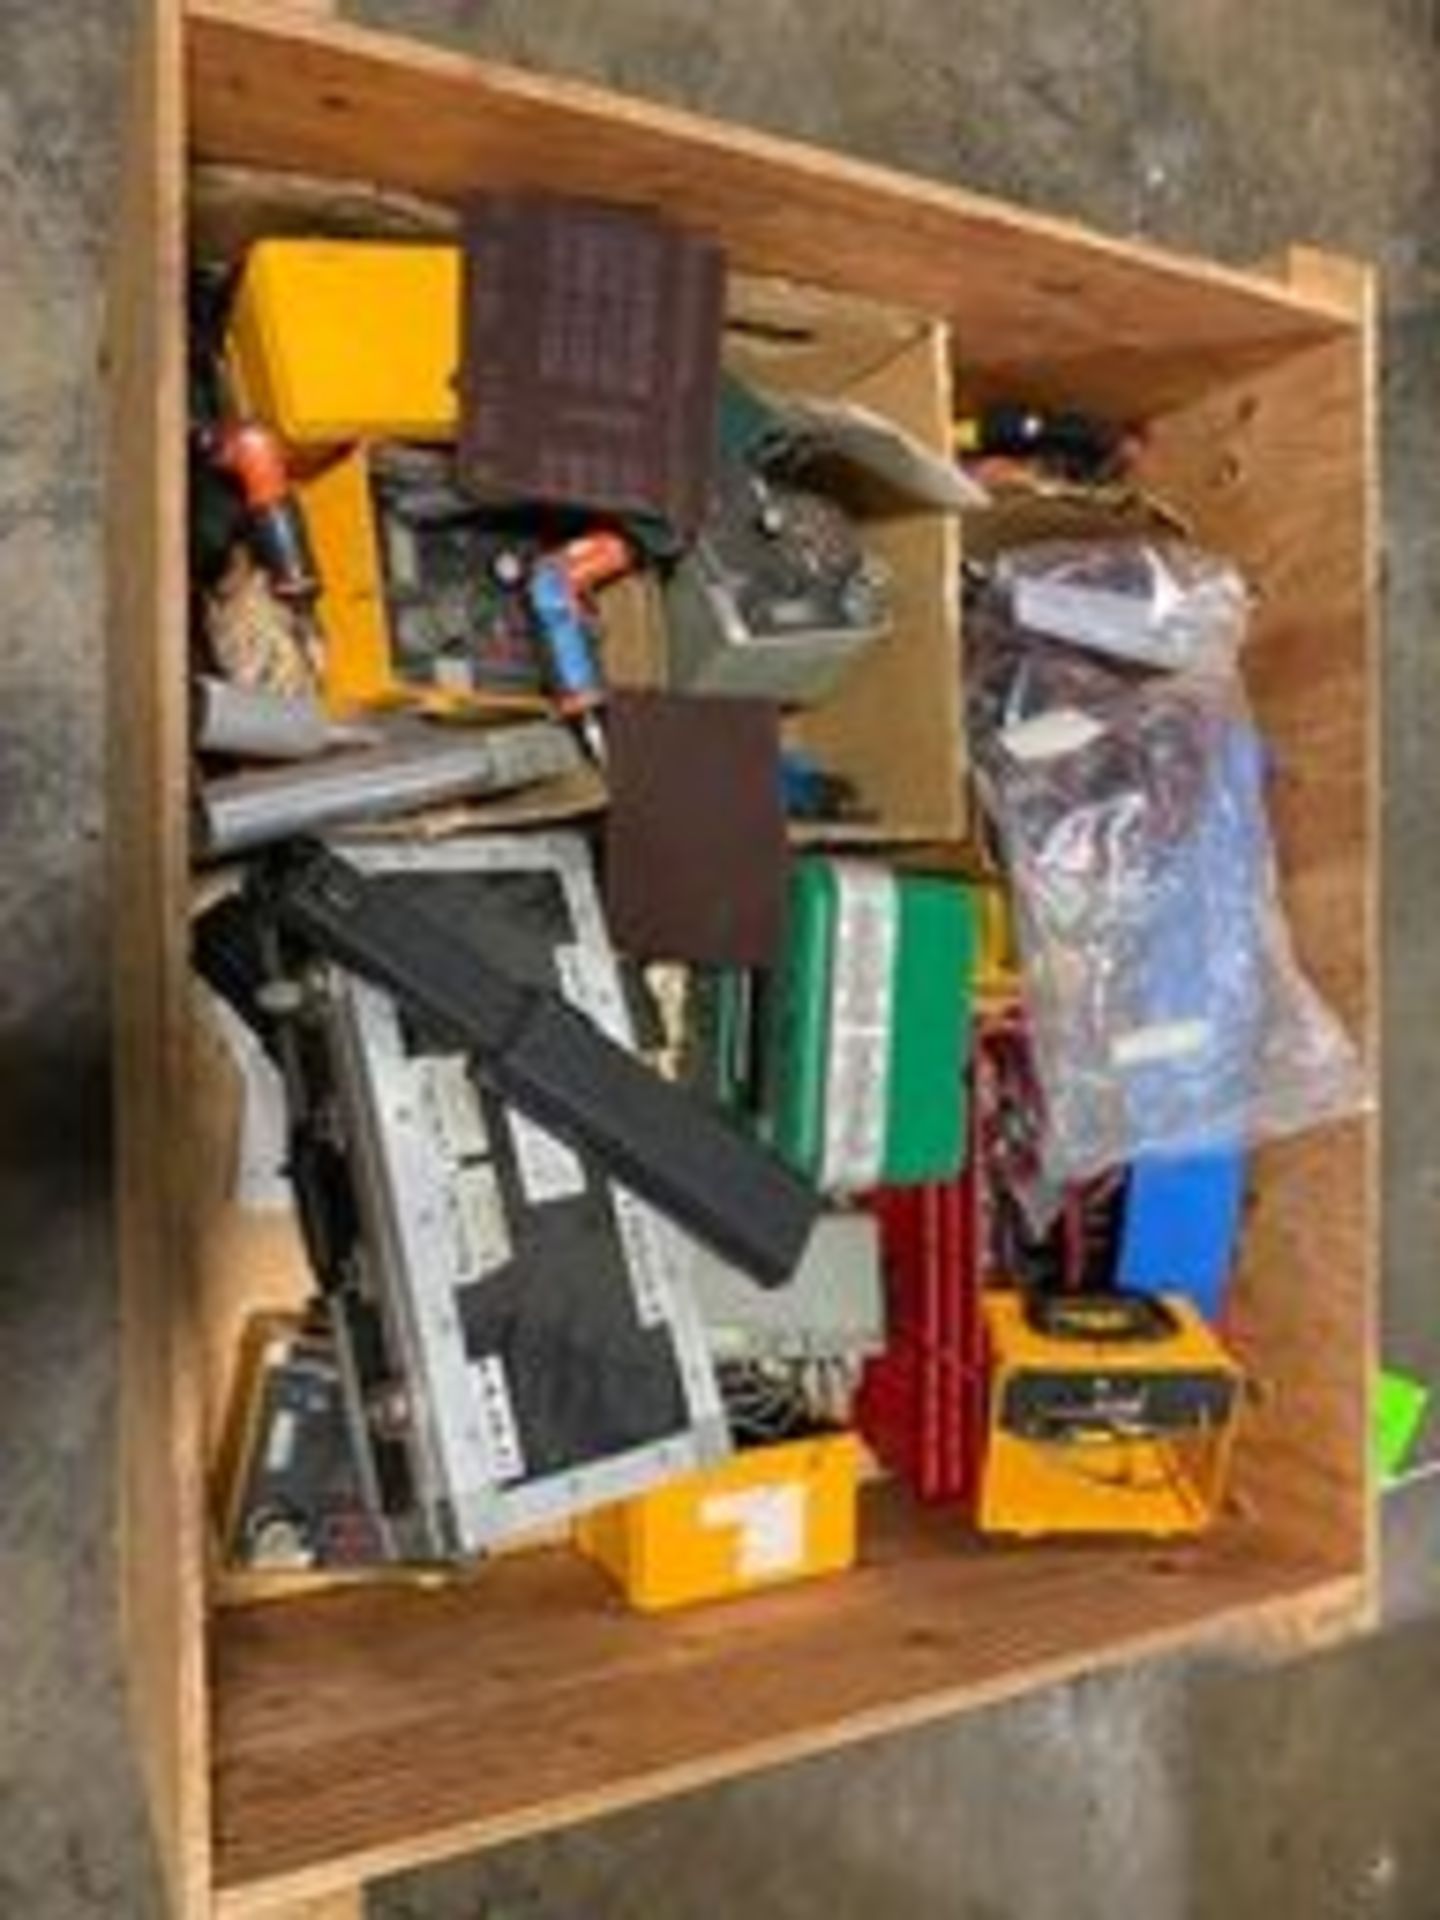 Wood Box of Aro Air Power Tools & Misc. Calibration Units Rigging Price: $50 - Image 3 of 3